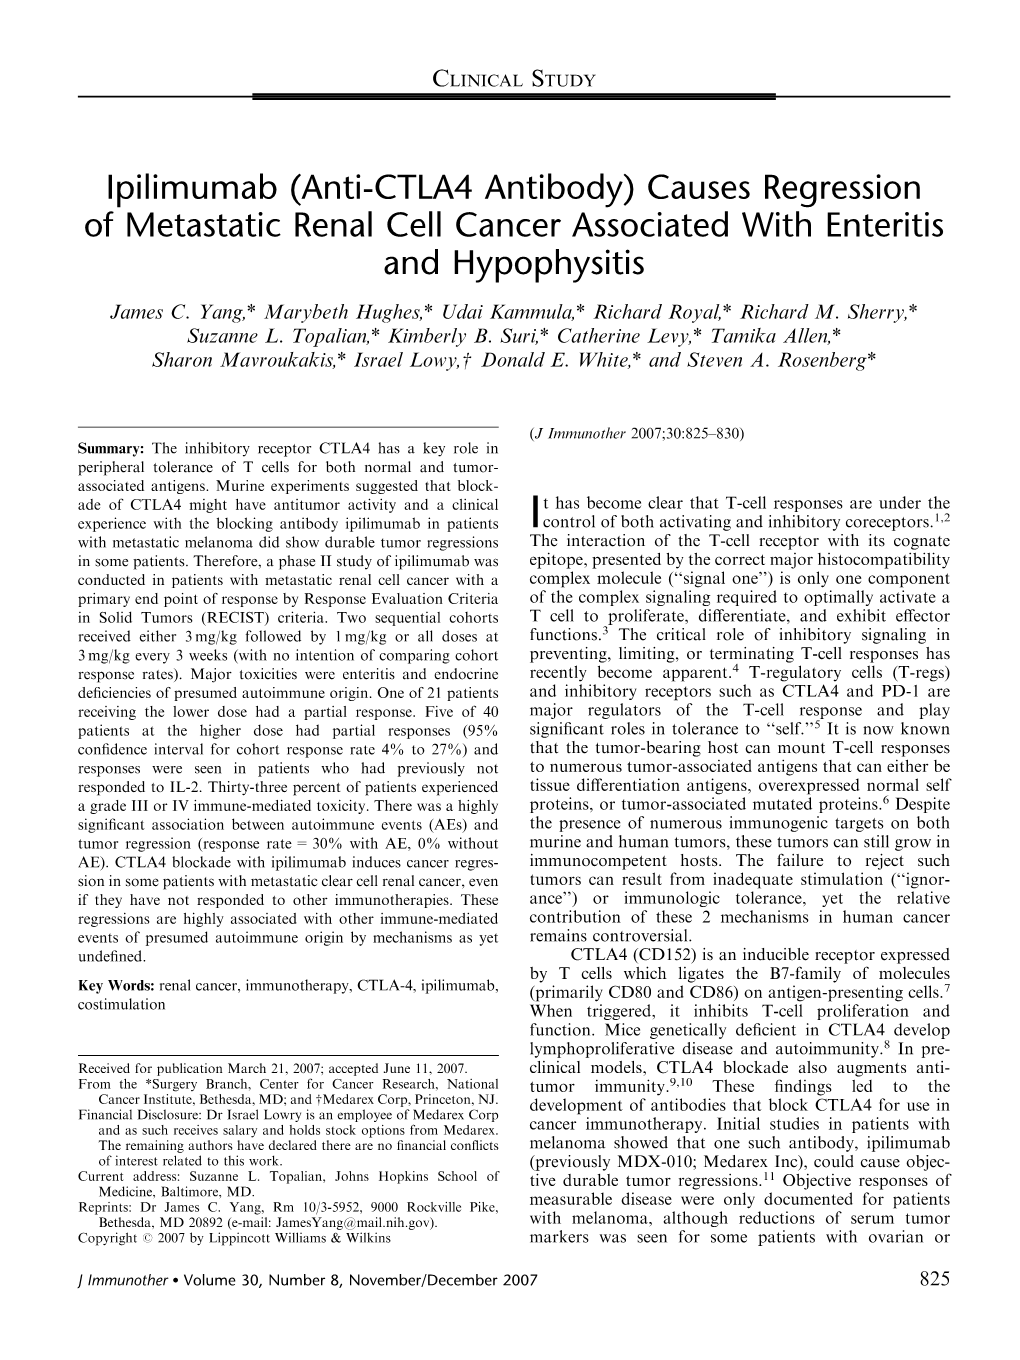 (Anti-CTLA4 Antibody) Causes Regression of Metastatic Renal Cell Cancer Associated with Enteritis and Hypophysitis James C